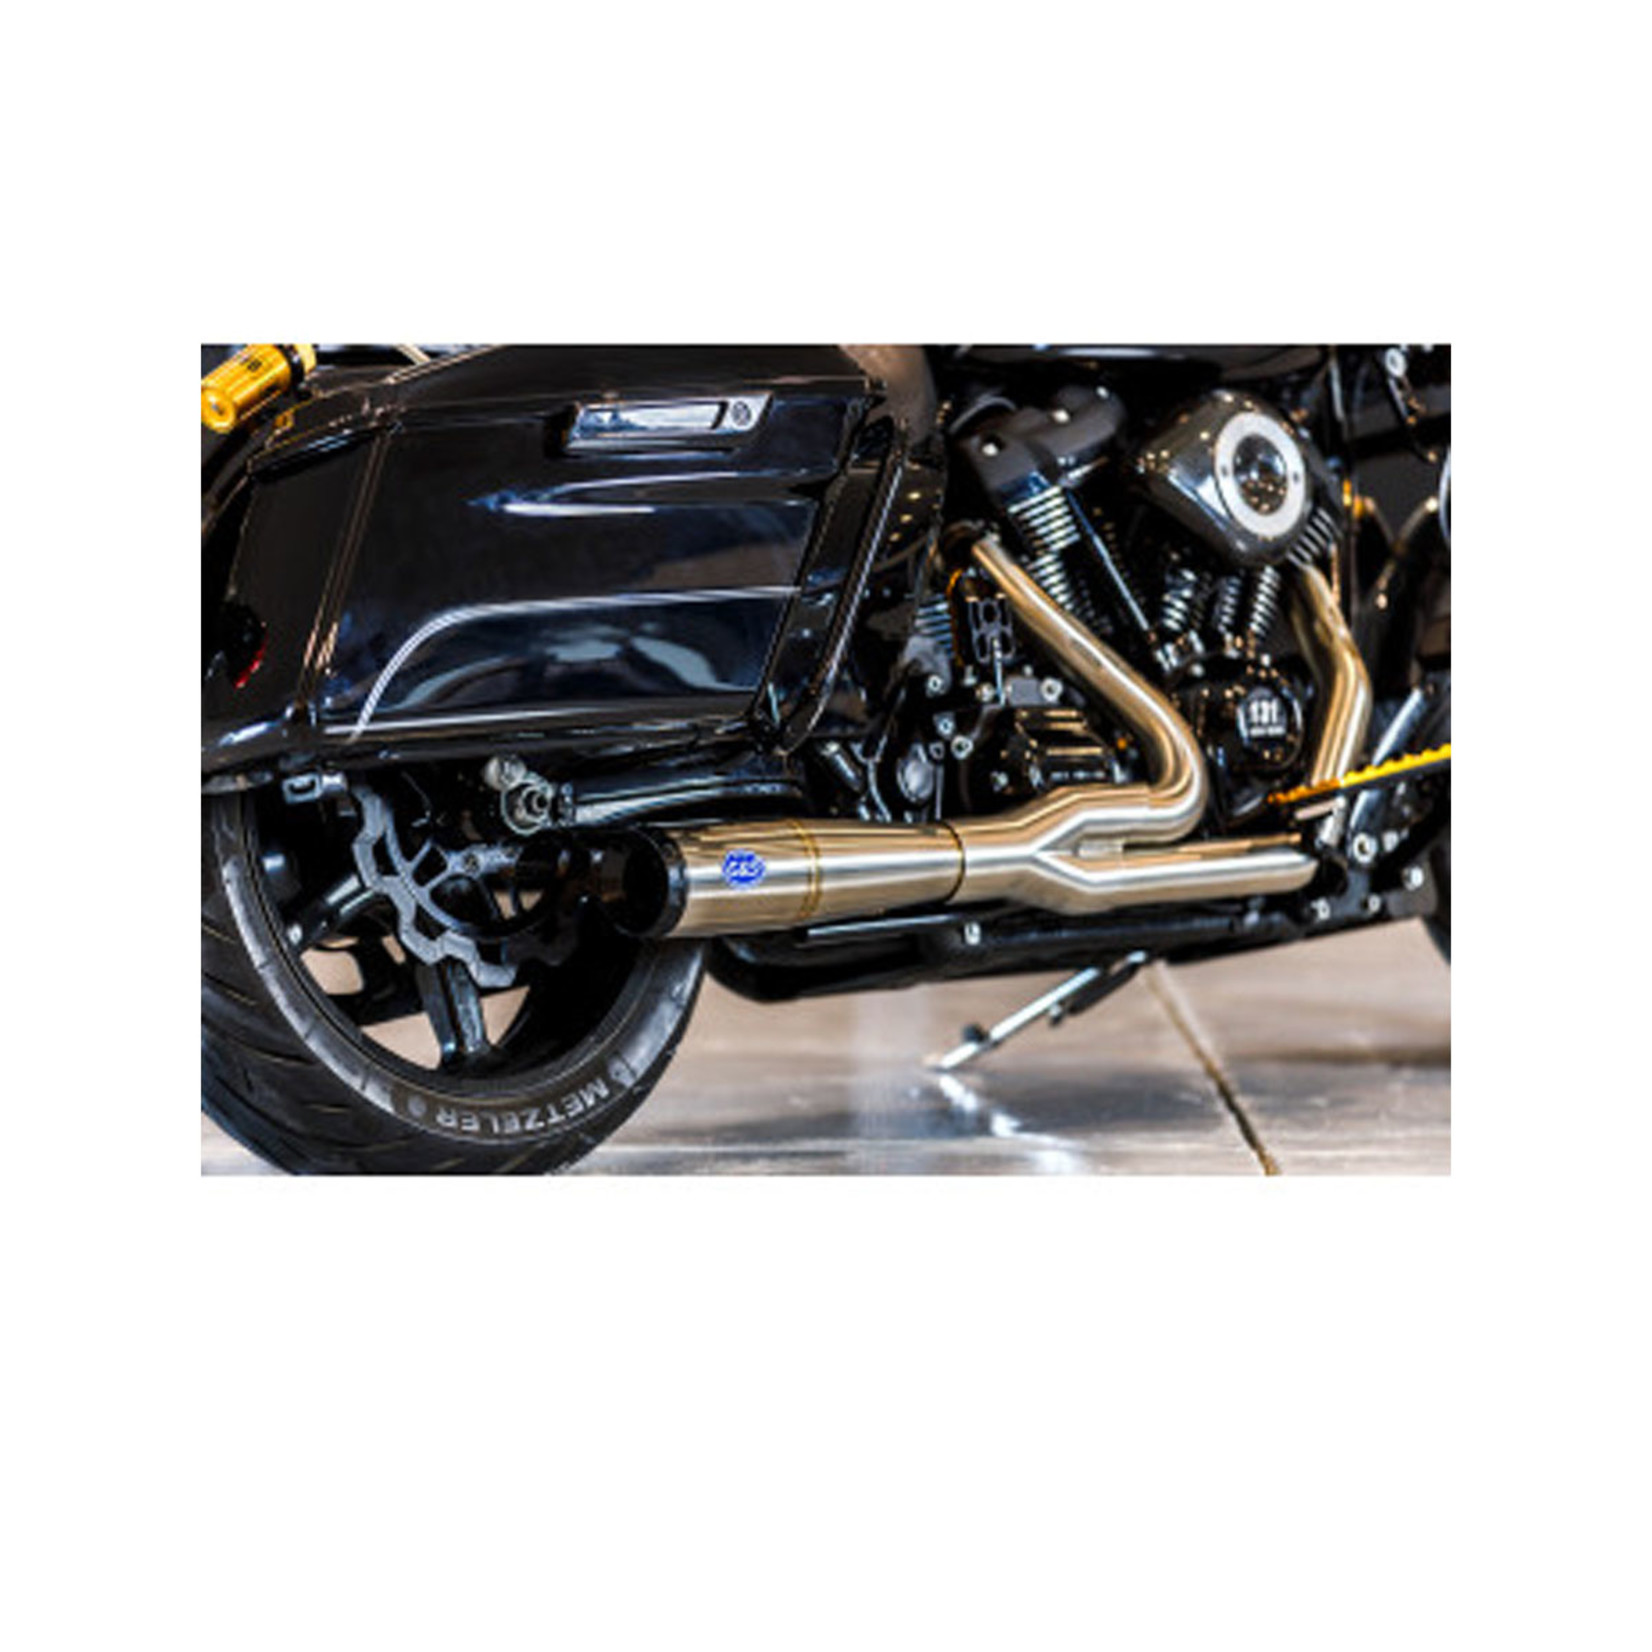 S&S CYCLE S&S CYCLE DIAMONDBACK  2-1 50 STATE EXHAUST SYSTEM, STAINLESS STEEL W/ BLACK ENDCAP for 2017-'22 M8 TOURING MODELS